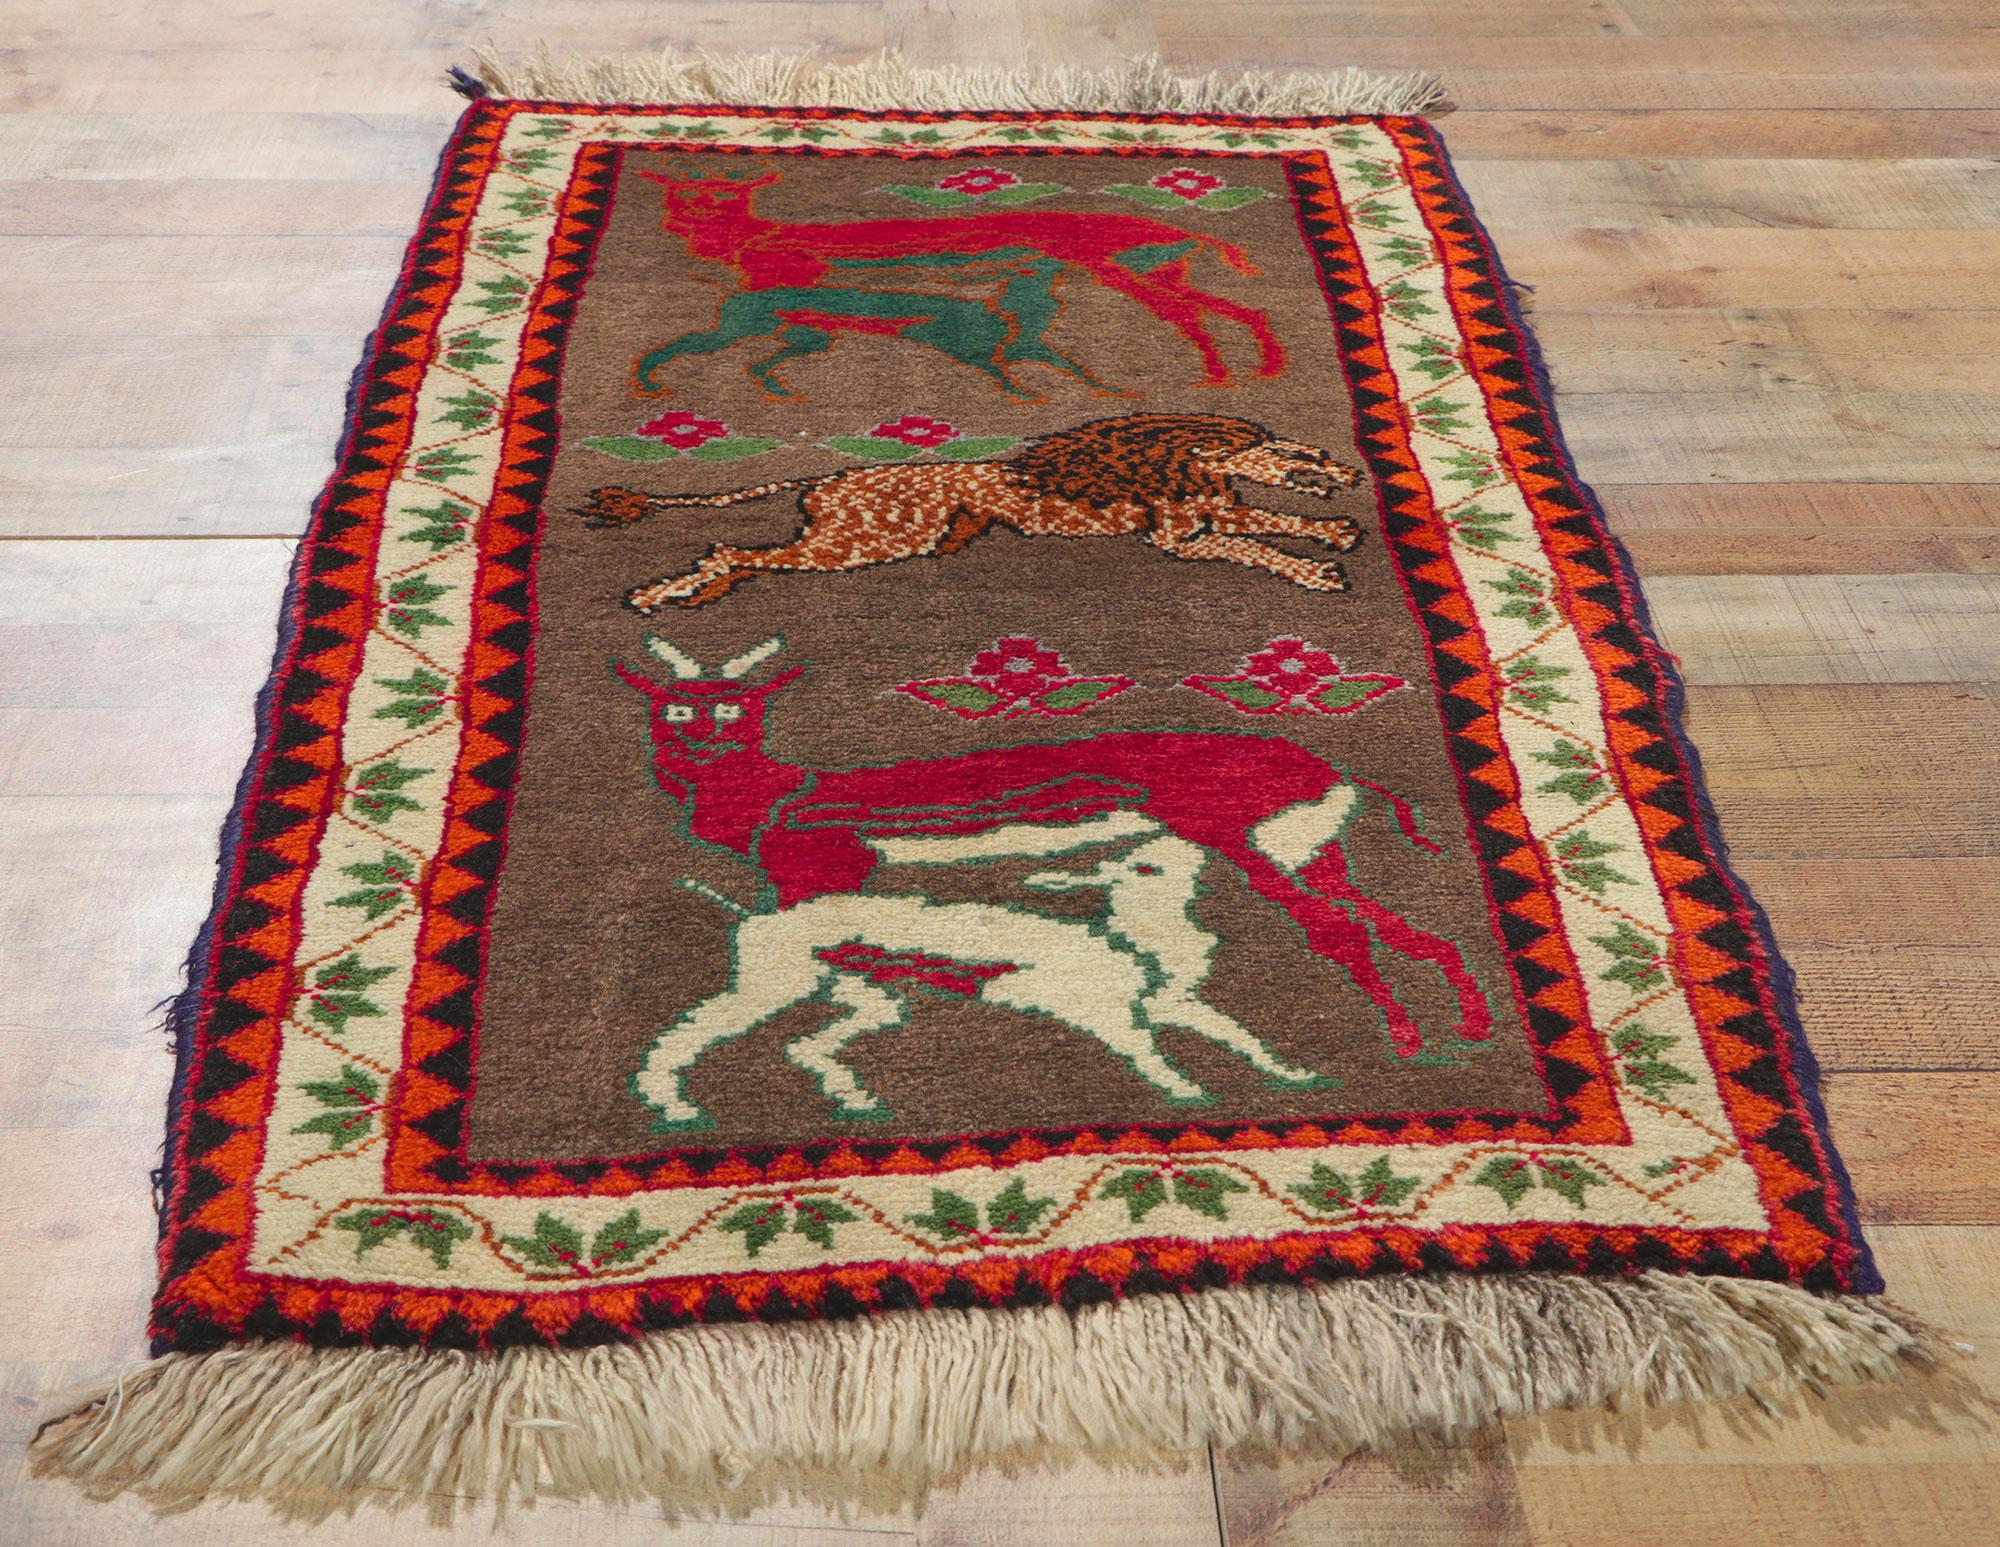 Vintage Persian Qashqai Gabbeh Rug with Zoomorphic Design For Sale 1